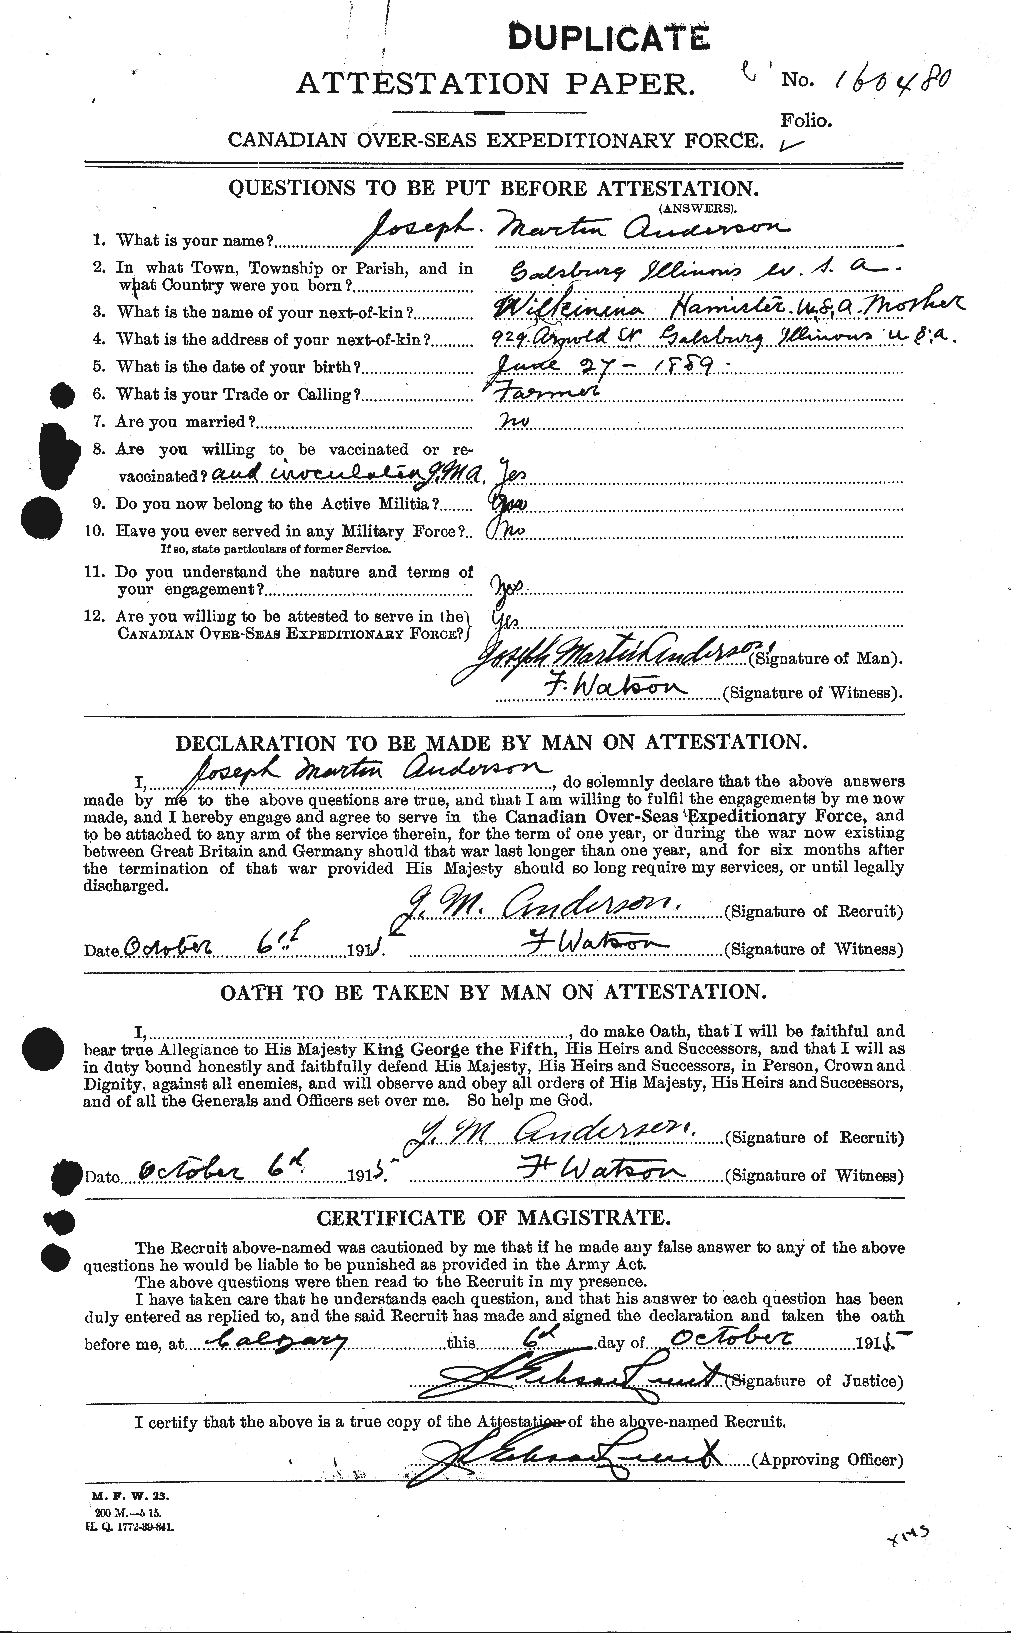 Personnel Records of the First World War - CEF 207560a